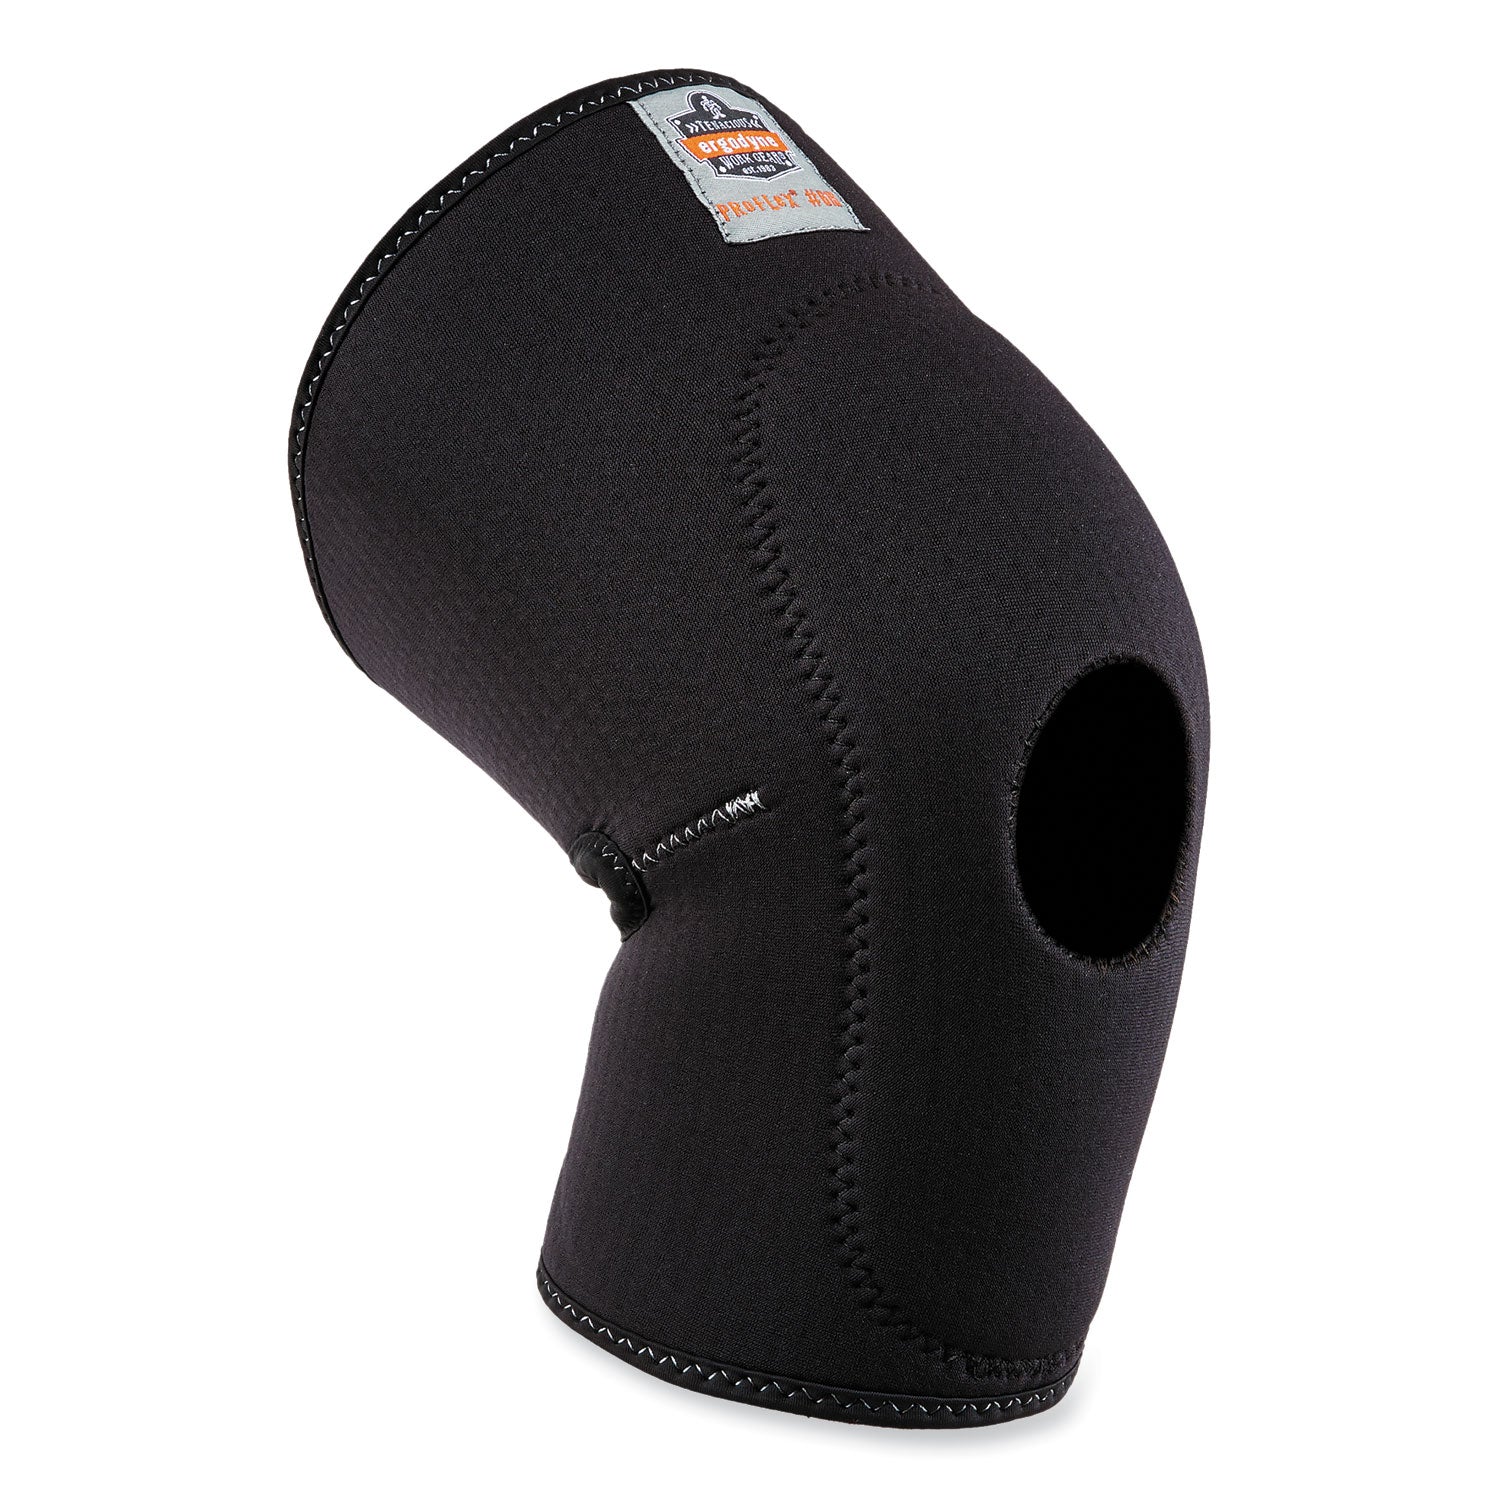 proflex-615-open-patella-anterior-pad-knee-sleeve-x-large-black-ships-in-1-3-business-days_ego16535 - 1